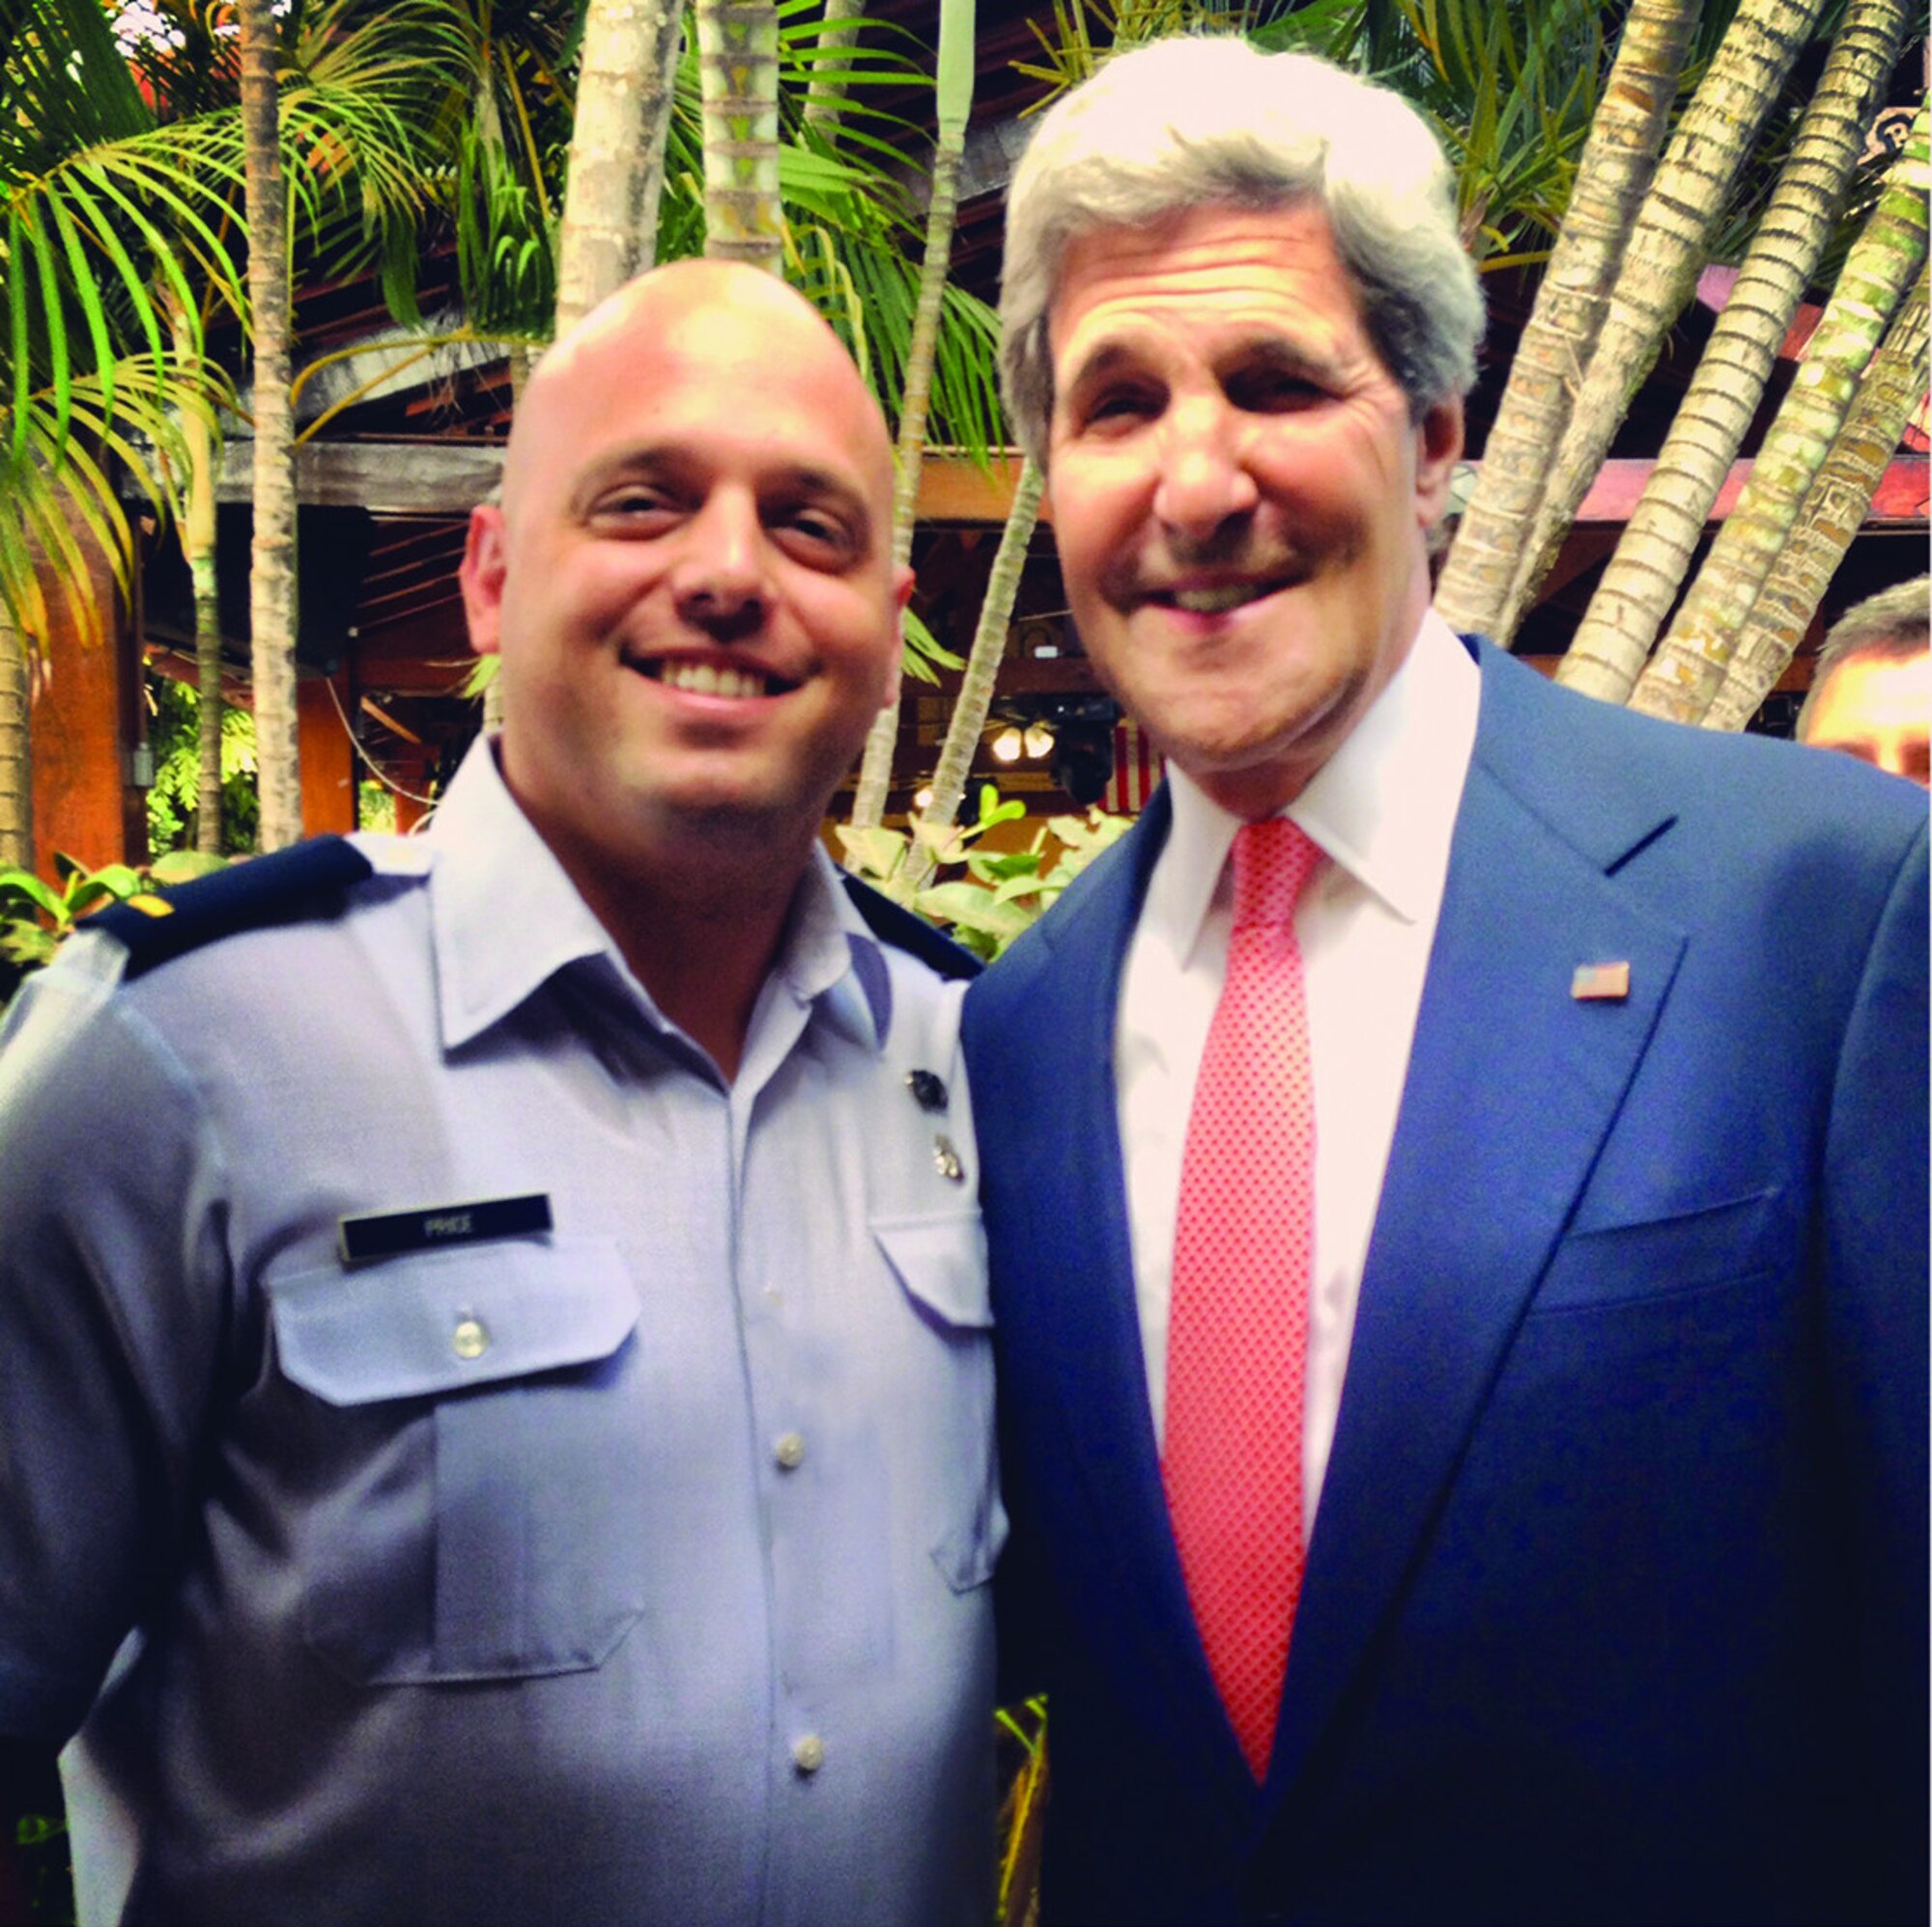 Capt Christopher Price with Former Secretary of State John Kerry at the U.S. Embassy in Brasilia, Brasil. Photo compliments of Capt Christopher Price.